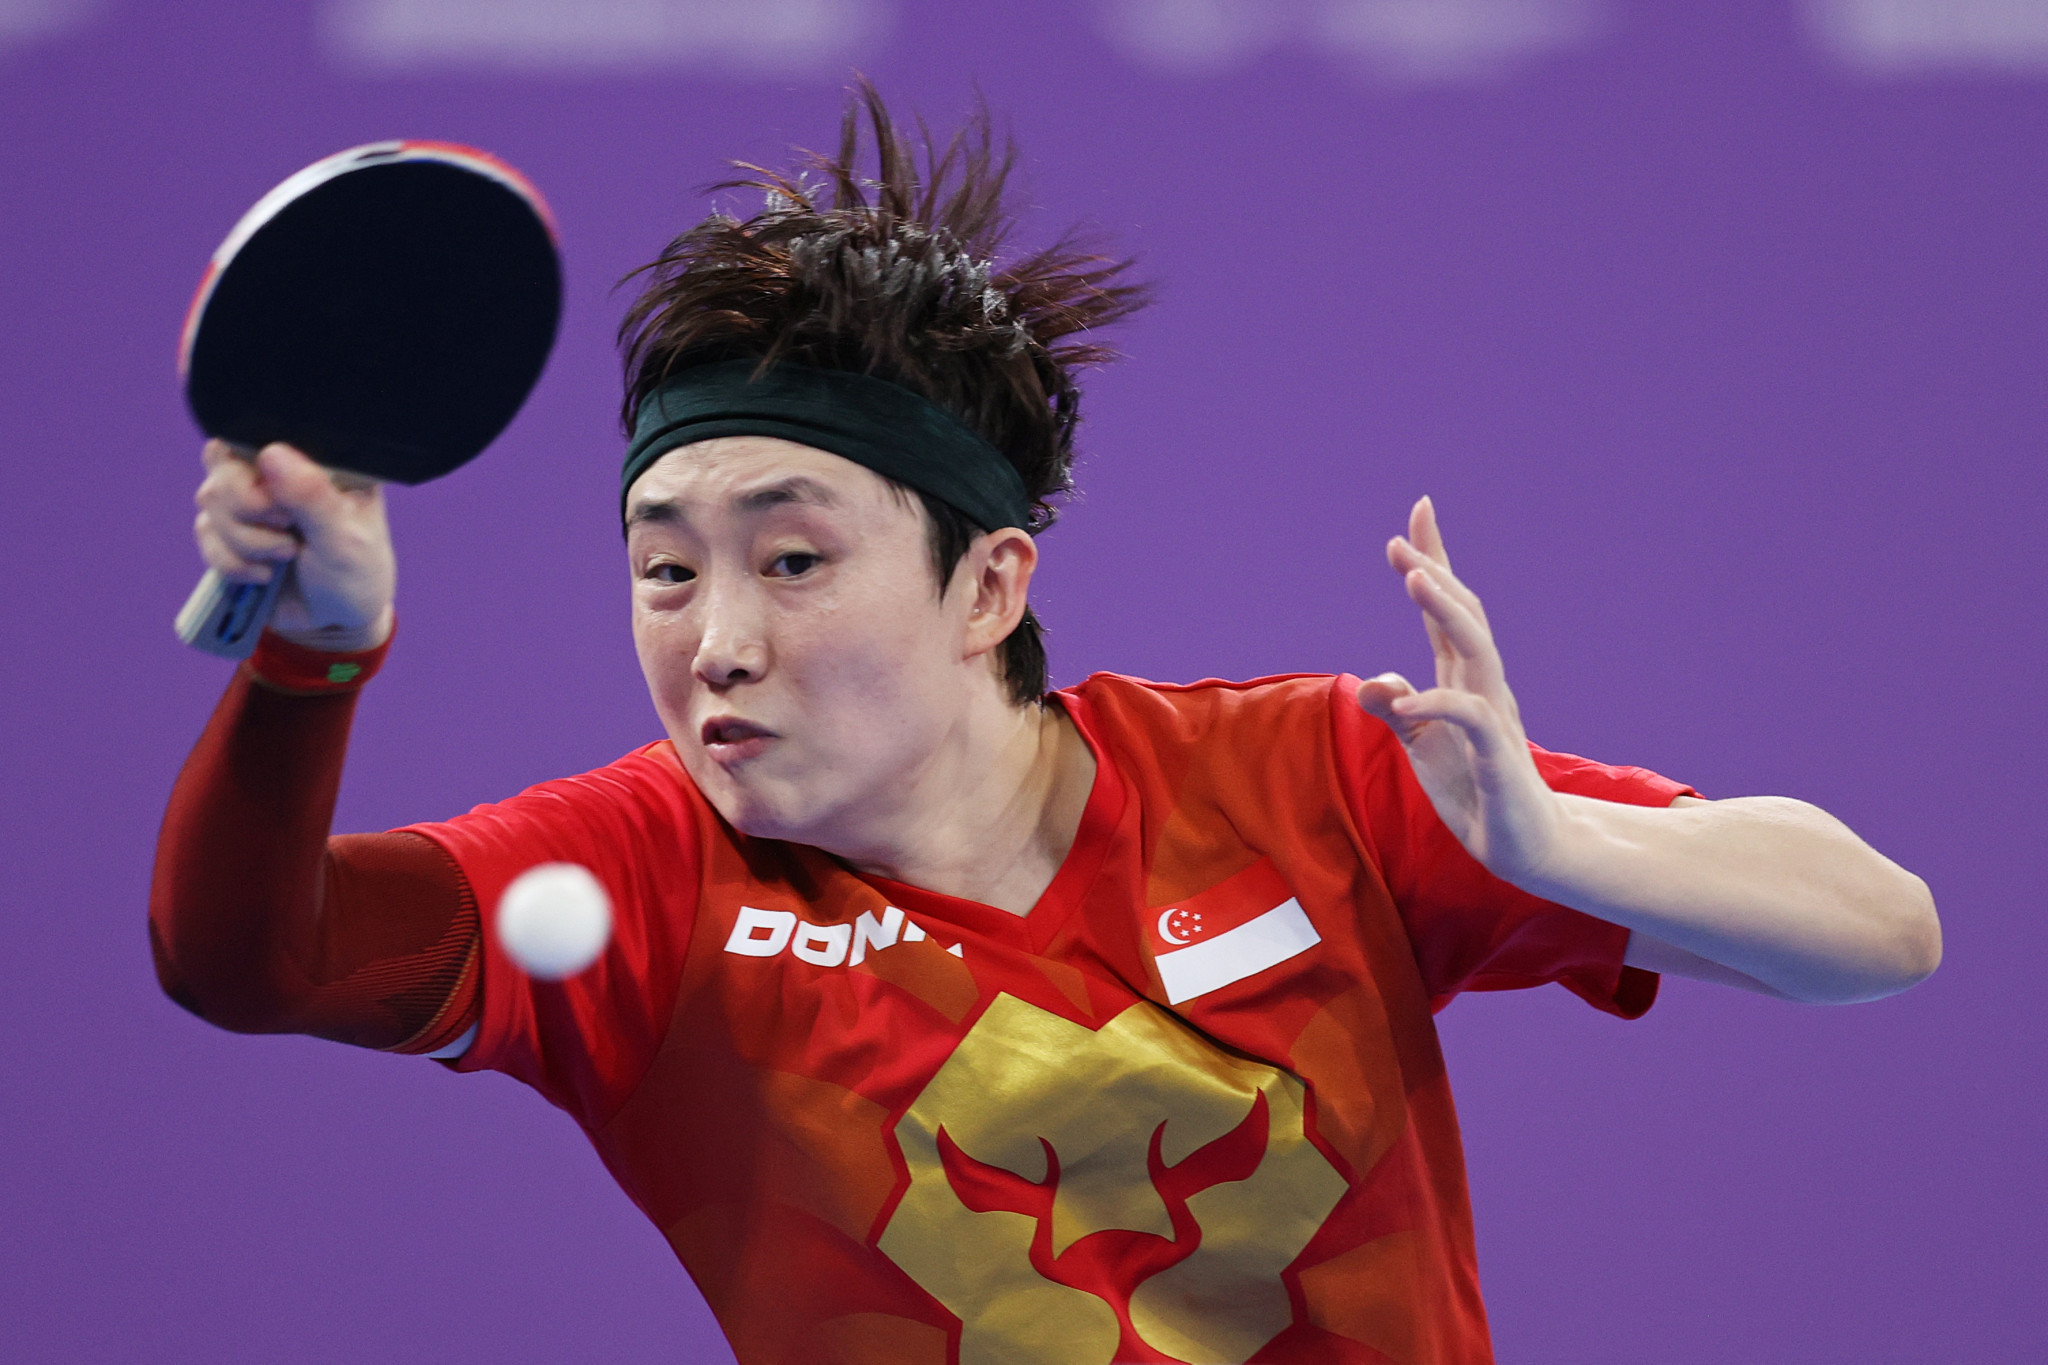 Feng Tianwei of Singapore beat compatriot Zeng Jian 4-3 in the women's table tennis singles decider before teaming up to qualify for the doubles final ©Getty Images